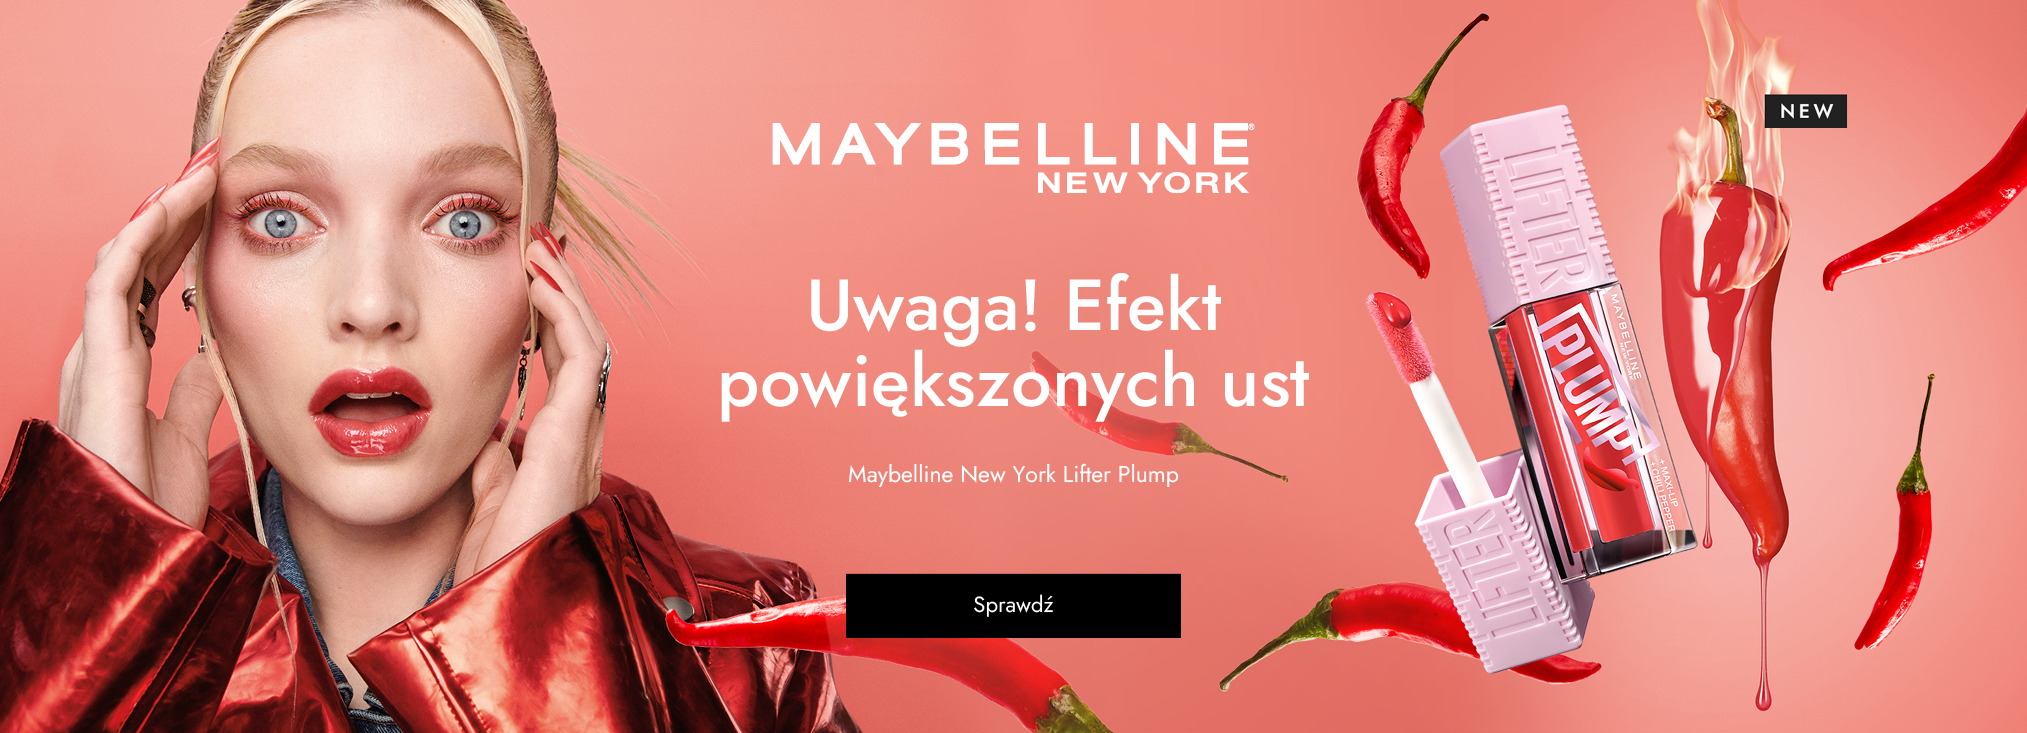 Maybelline New York Lifter Plump_makeup